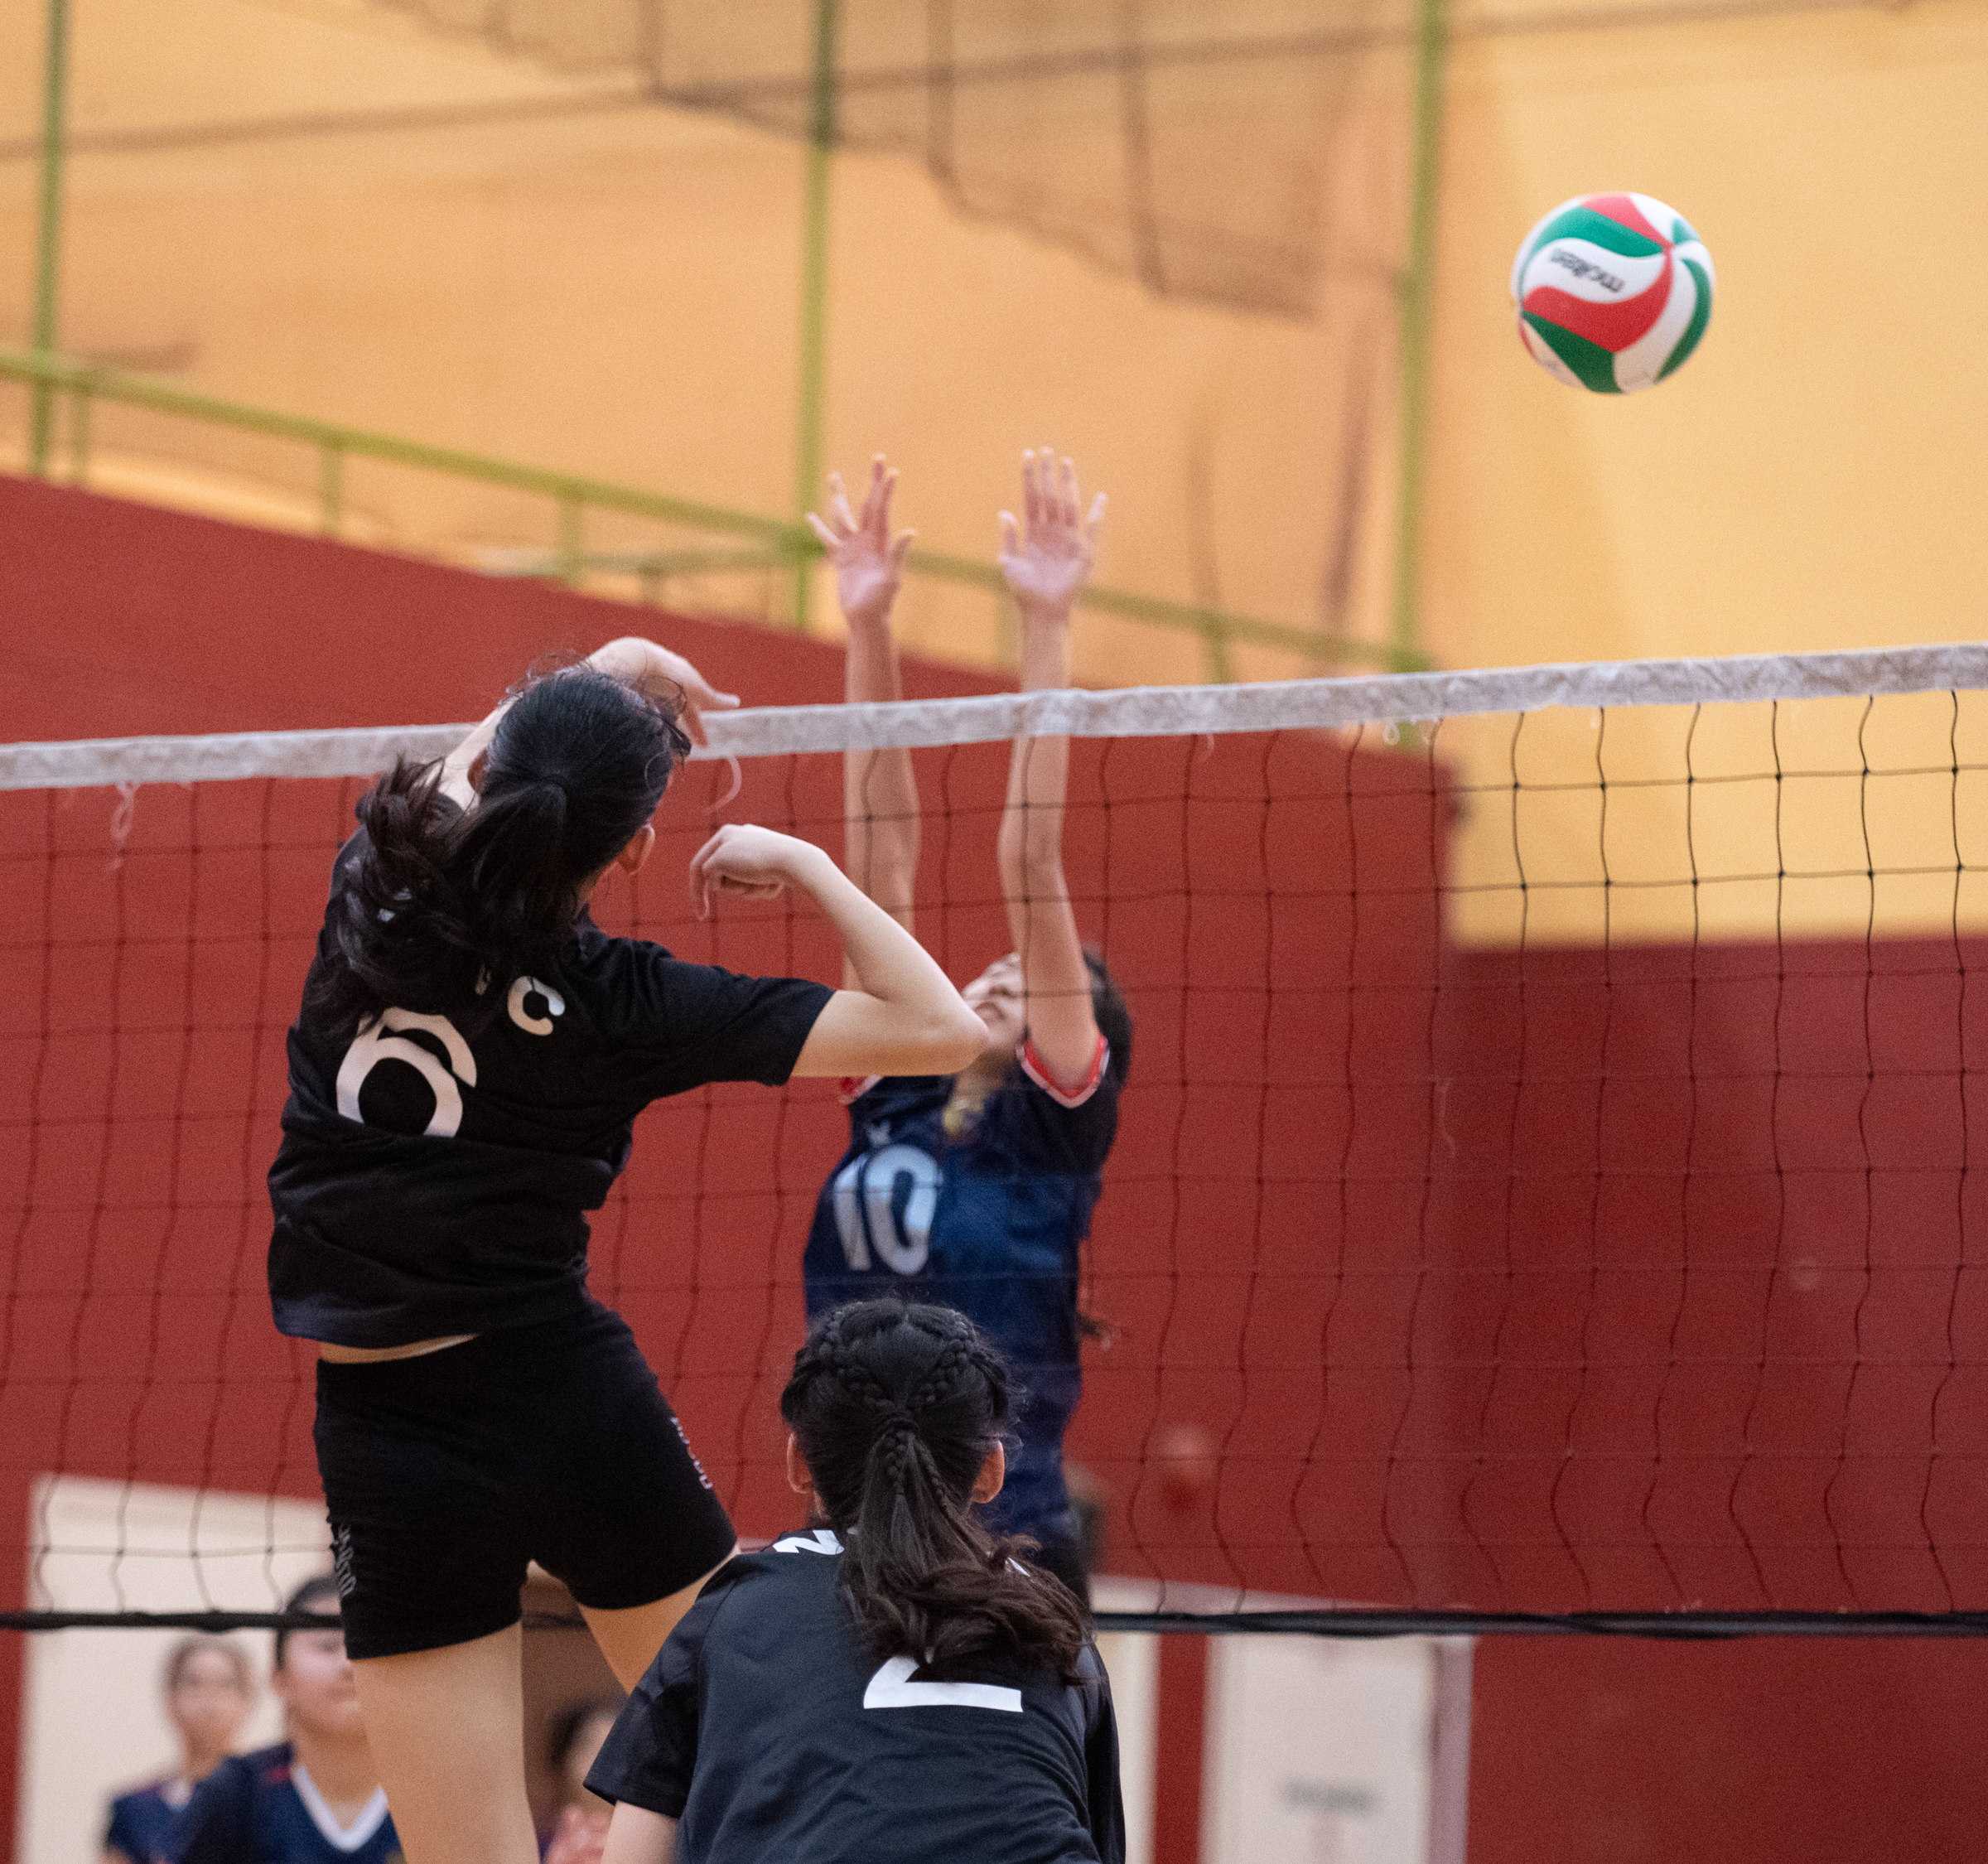 NSG 2023 Volleyball : Highlights from Nanyang JC vs Anglo-Chinese JC in Girls' A Division Prelim match!